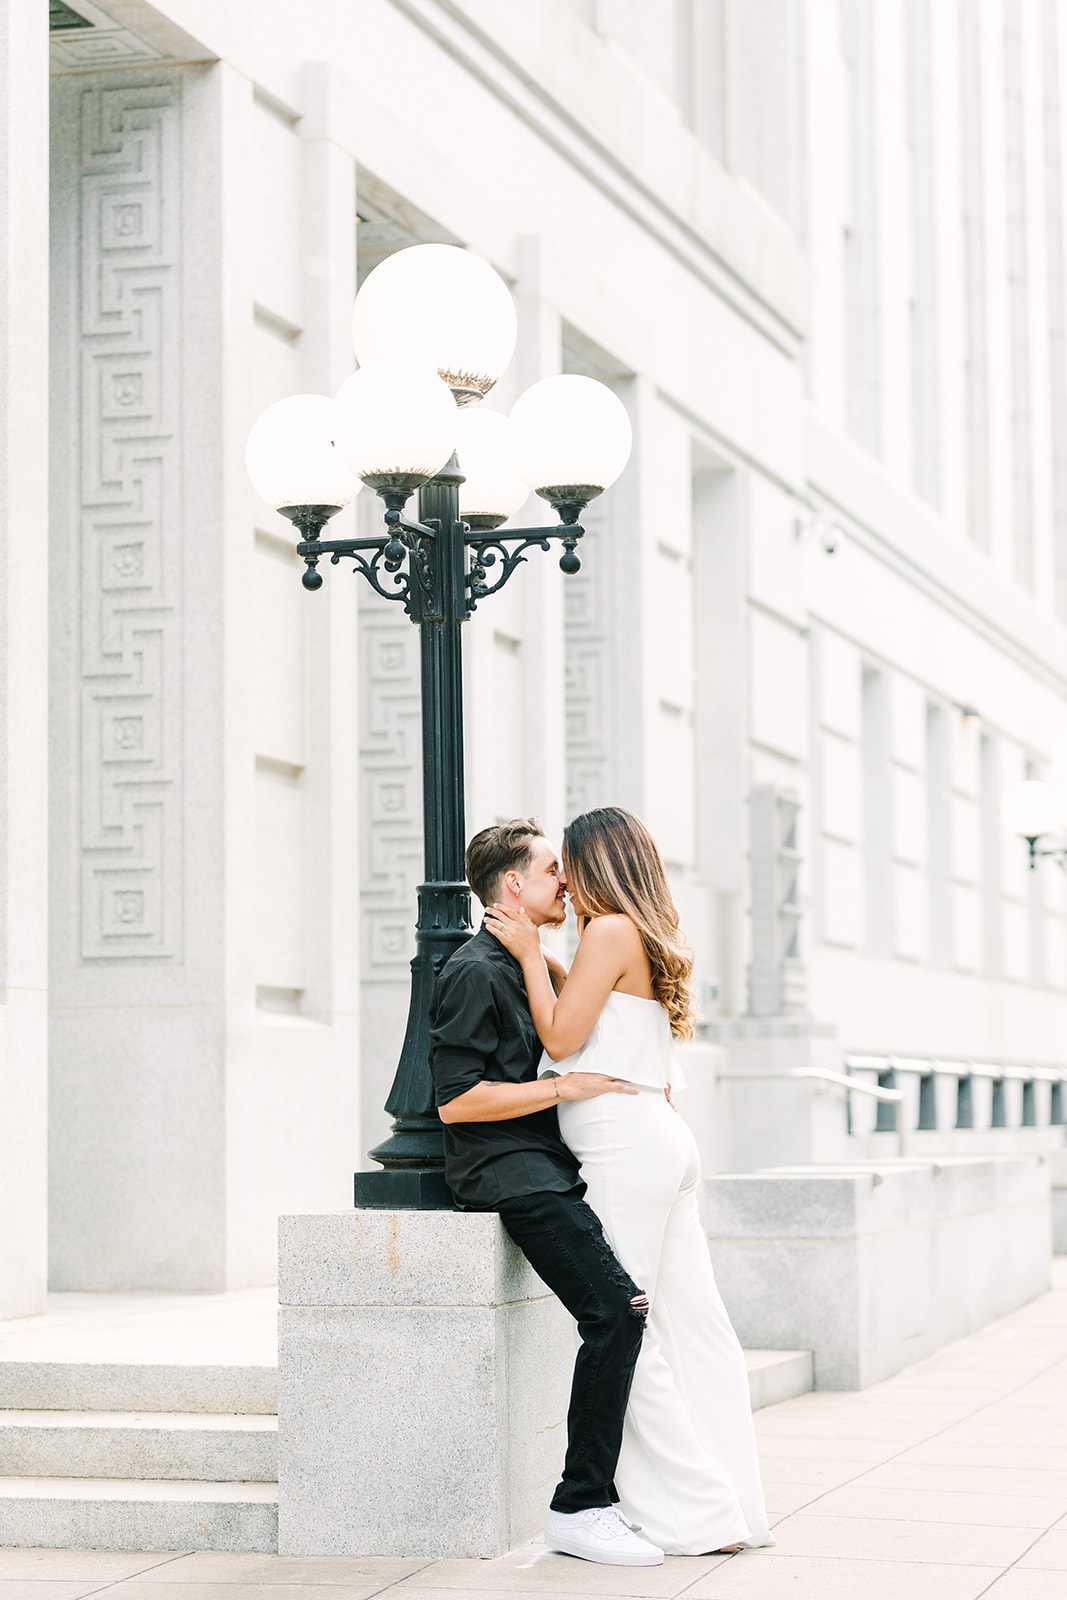 City engagement session in downtown Raleigh, North Carolina